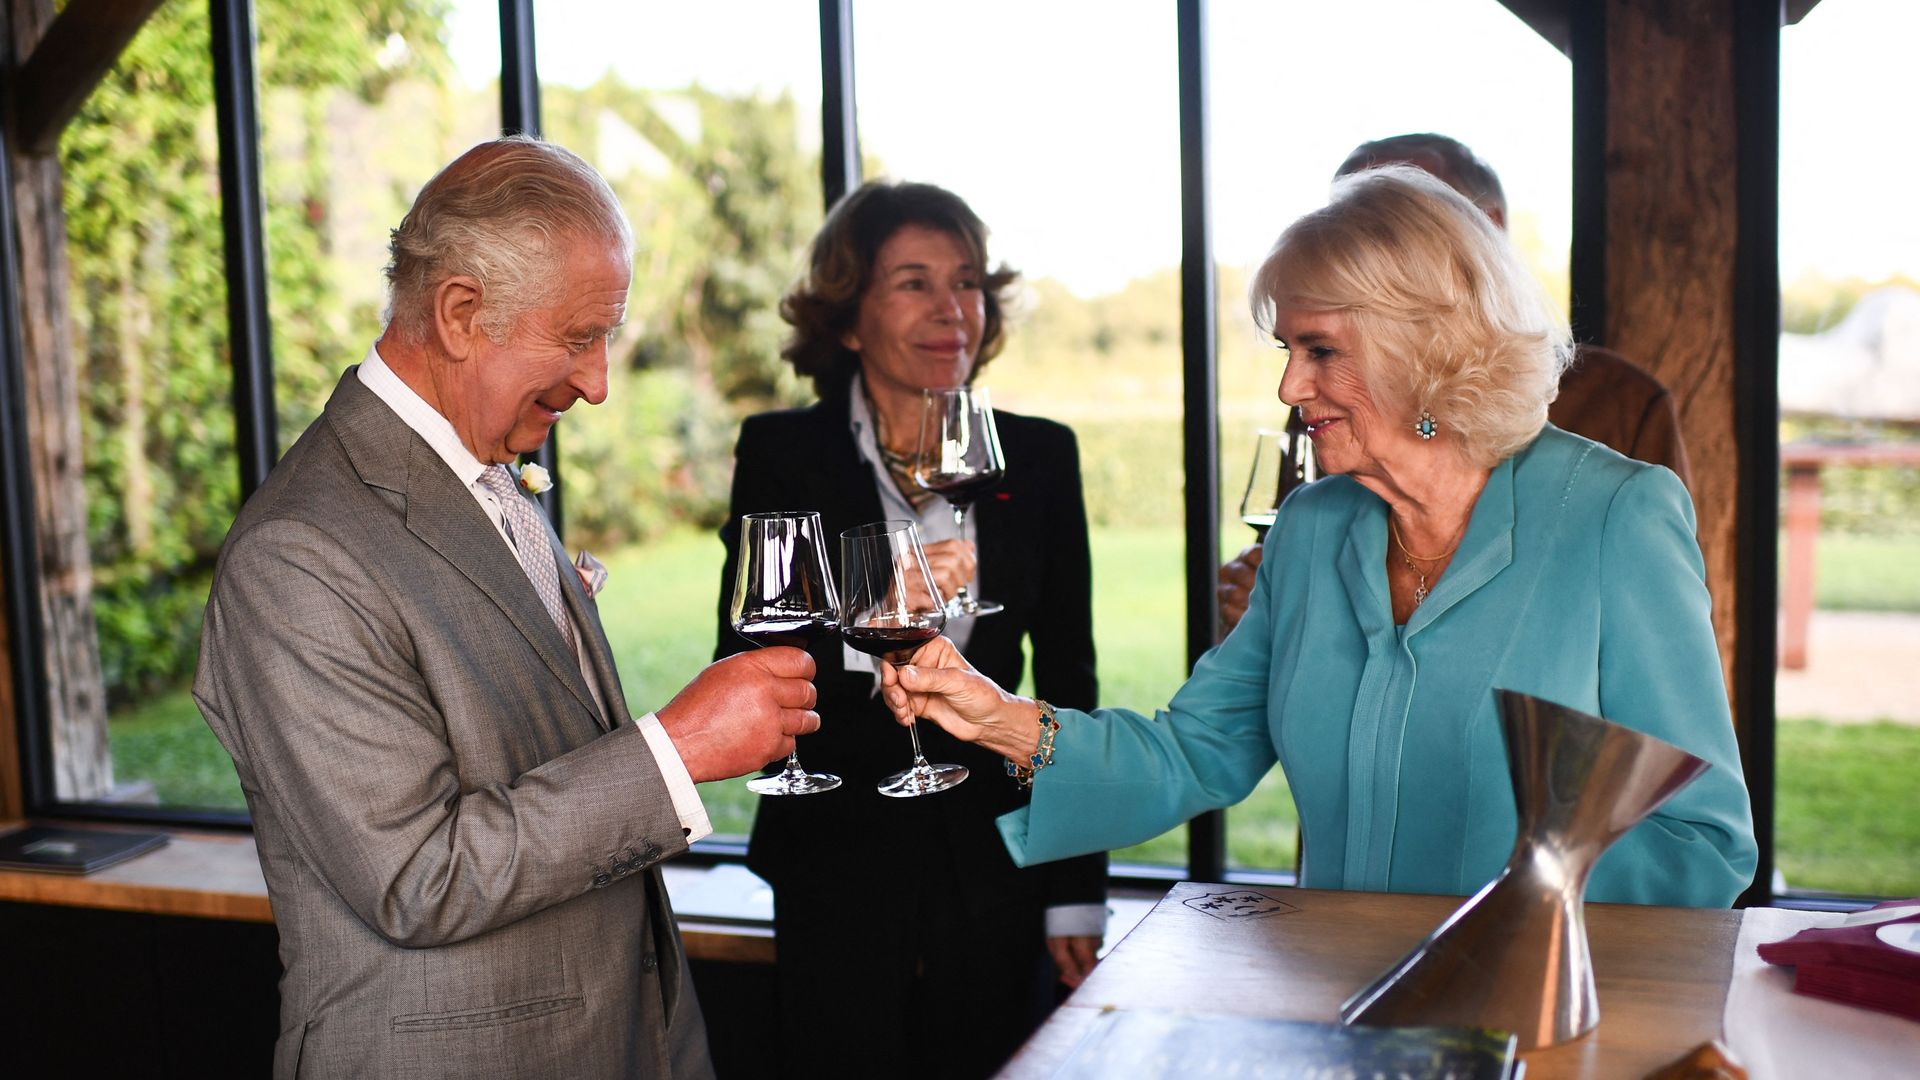 King Charles and Queen Camilla toasting glasses during visit to a vineyard in France